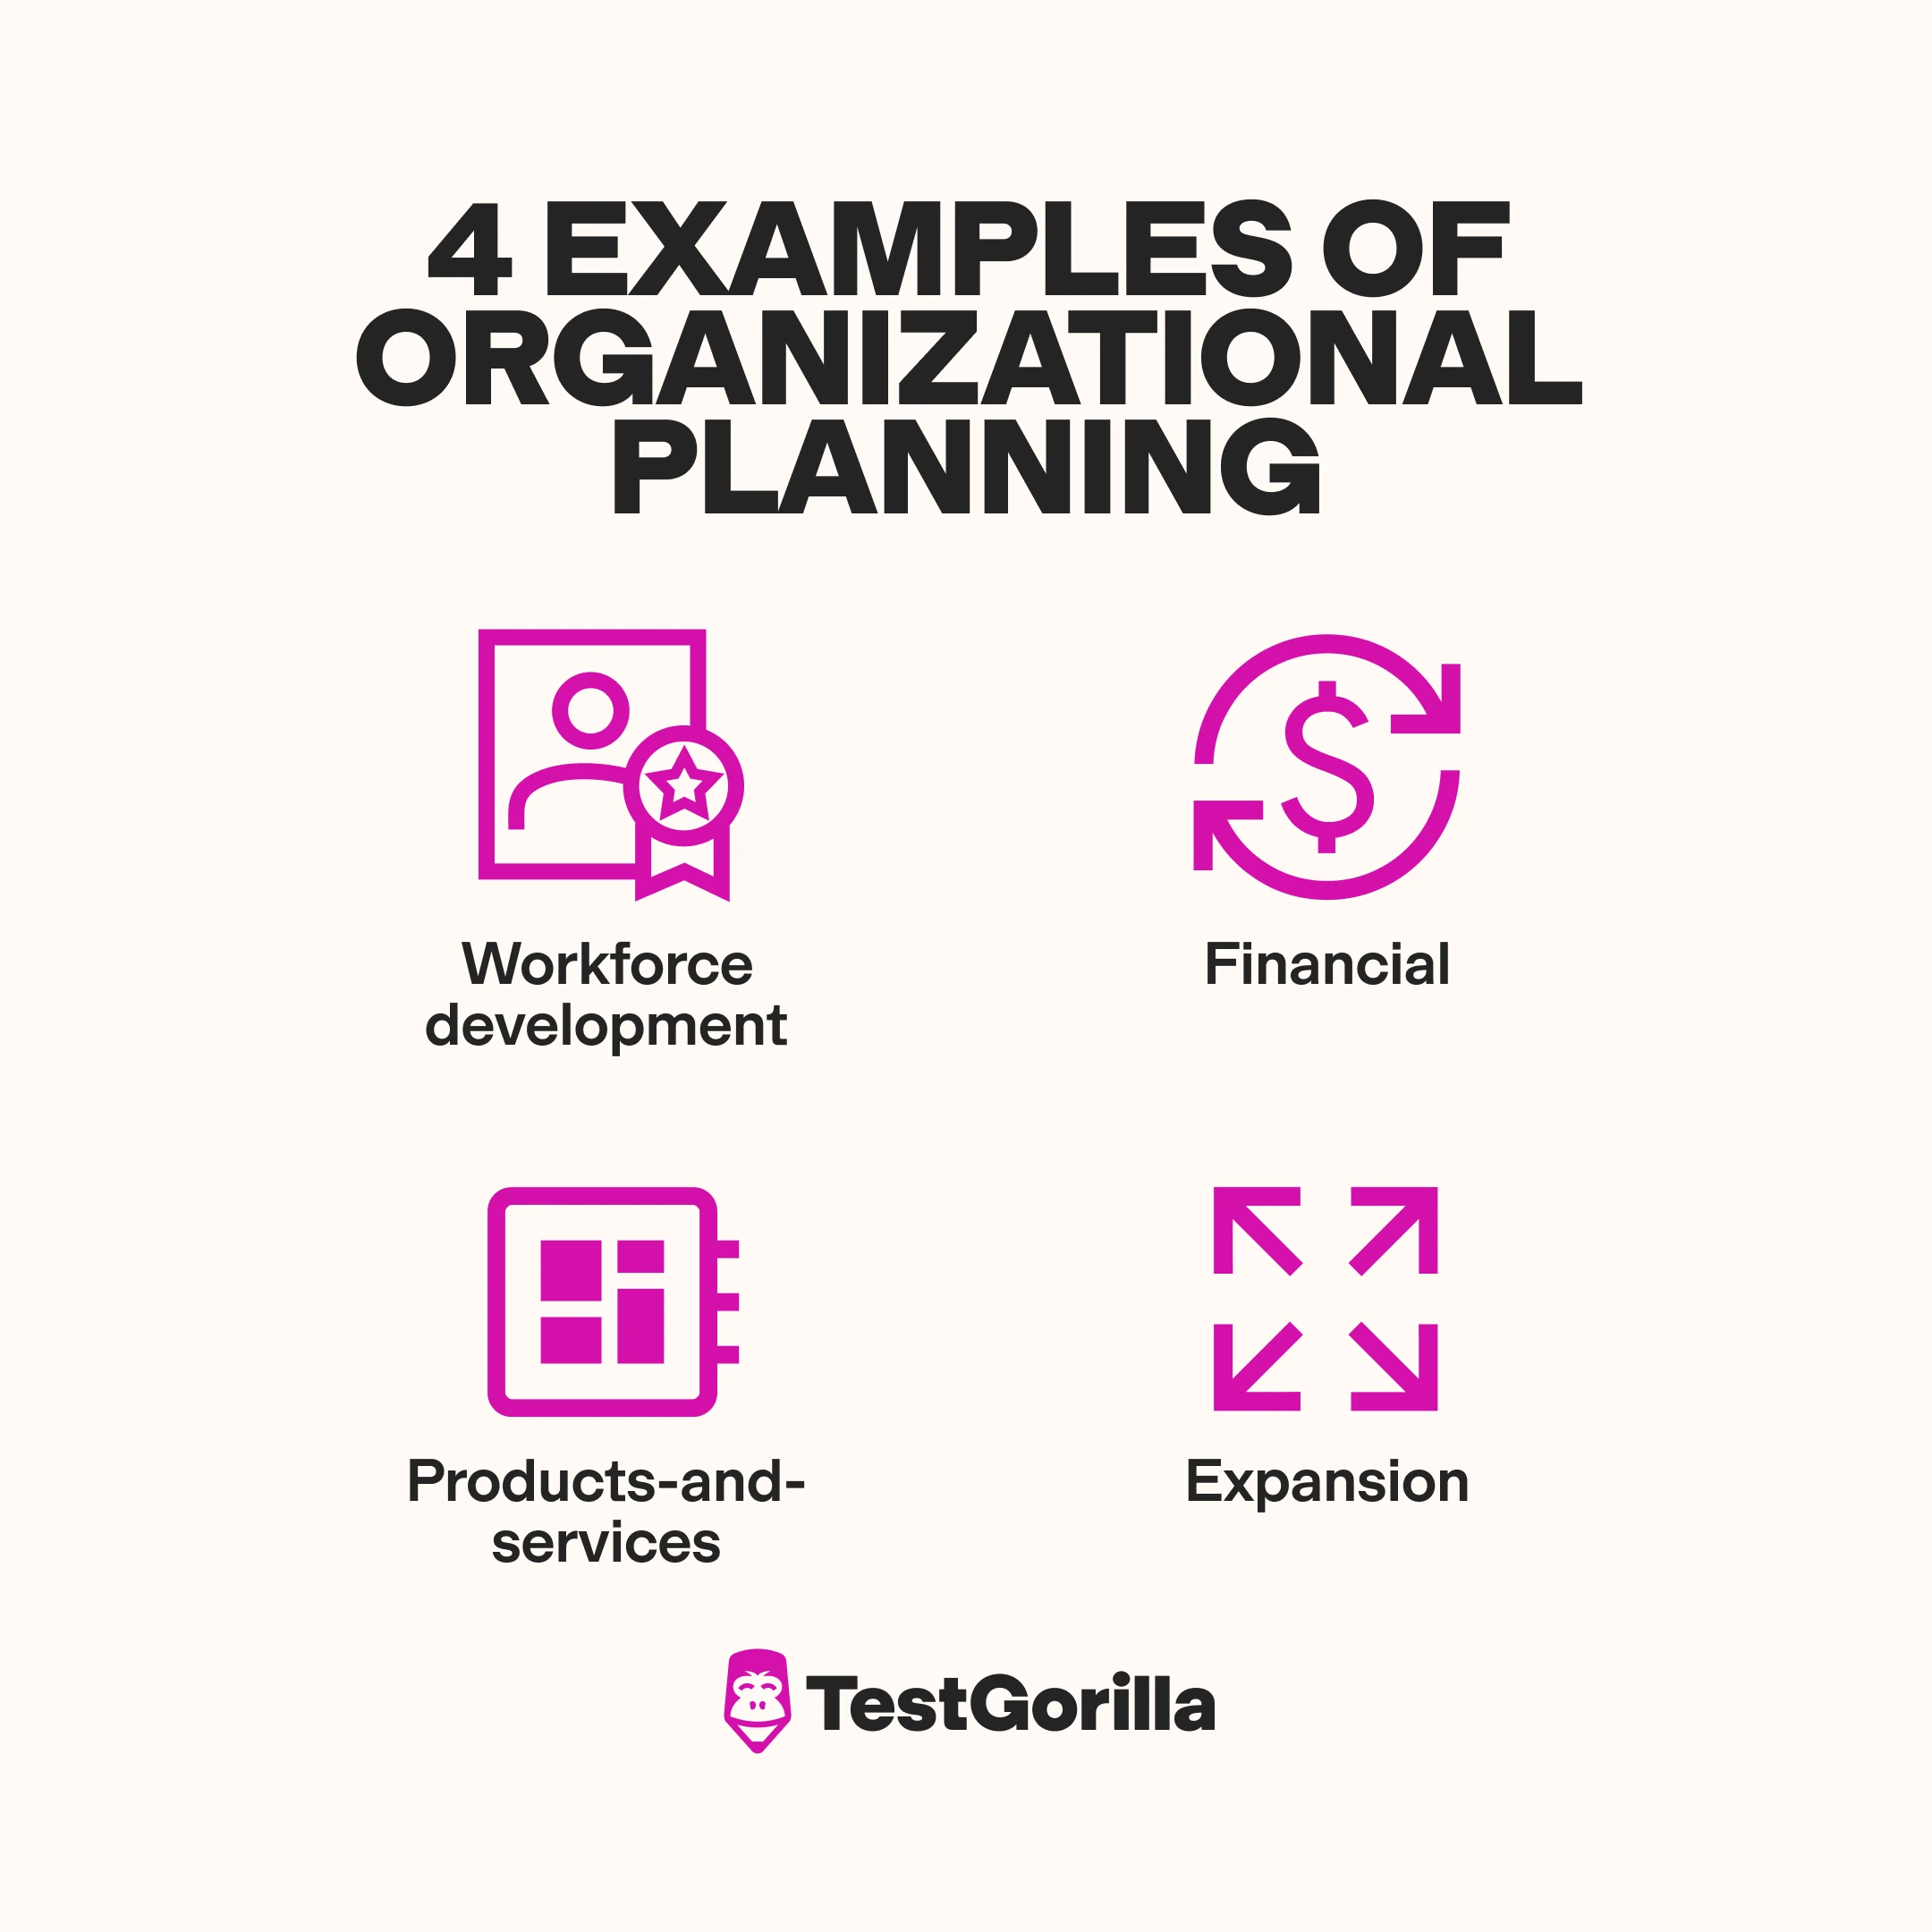 4 examples of organizational planning